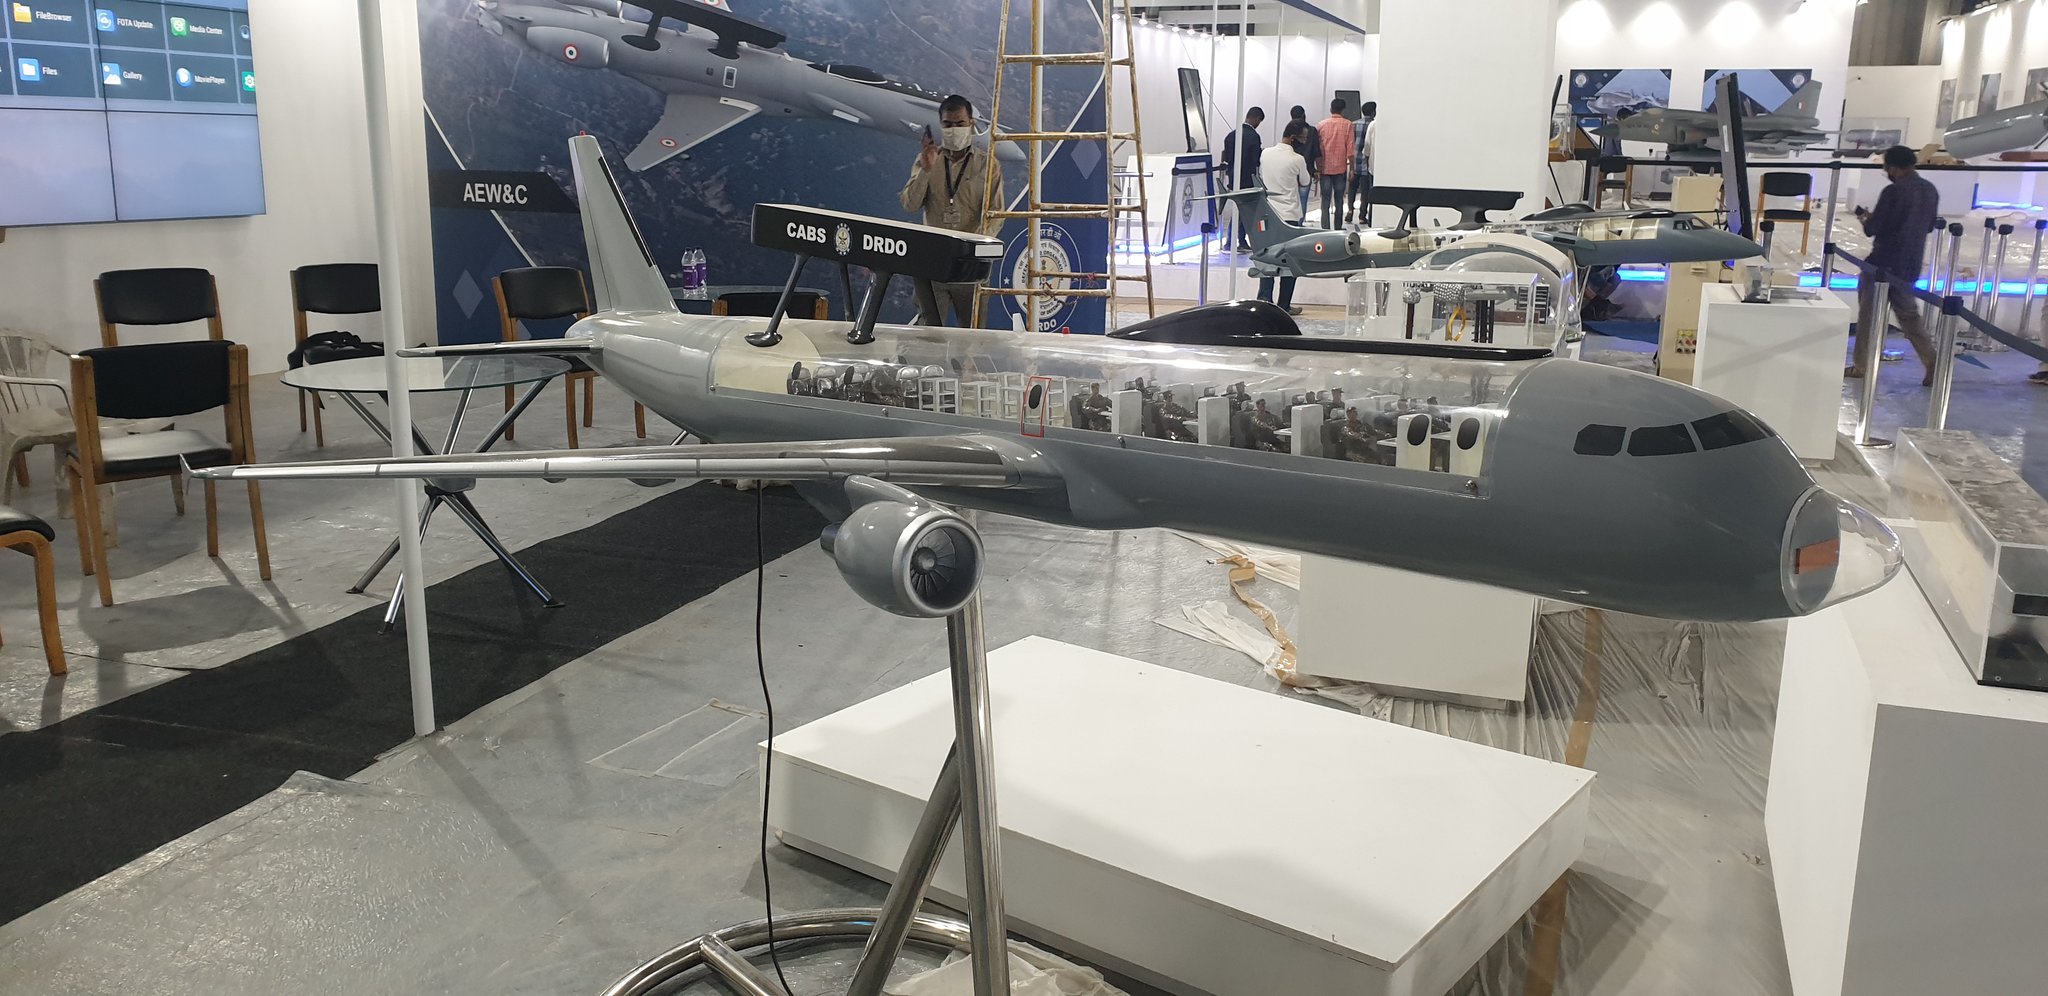 India's Combat Teaming Drones Emerge At AeroIndia 2021 - Livefist